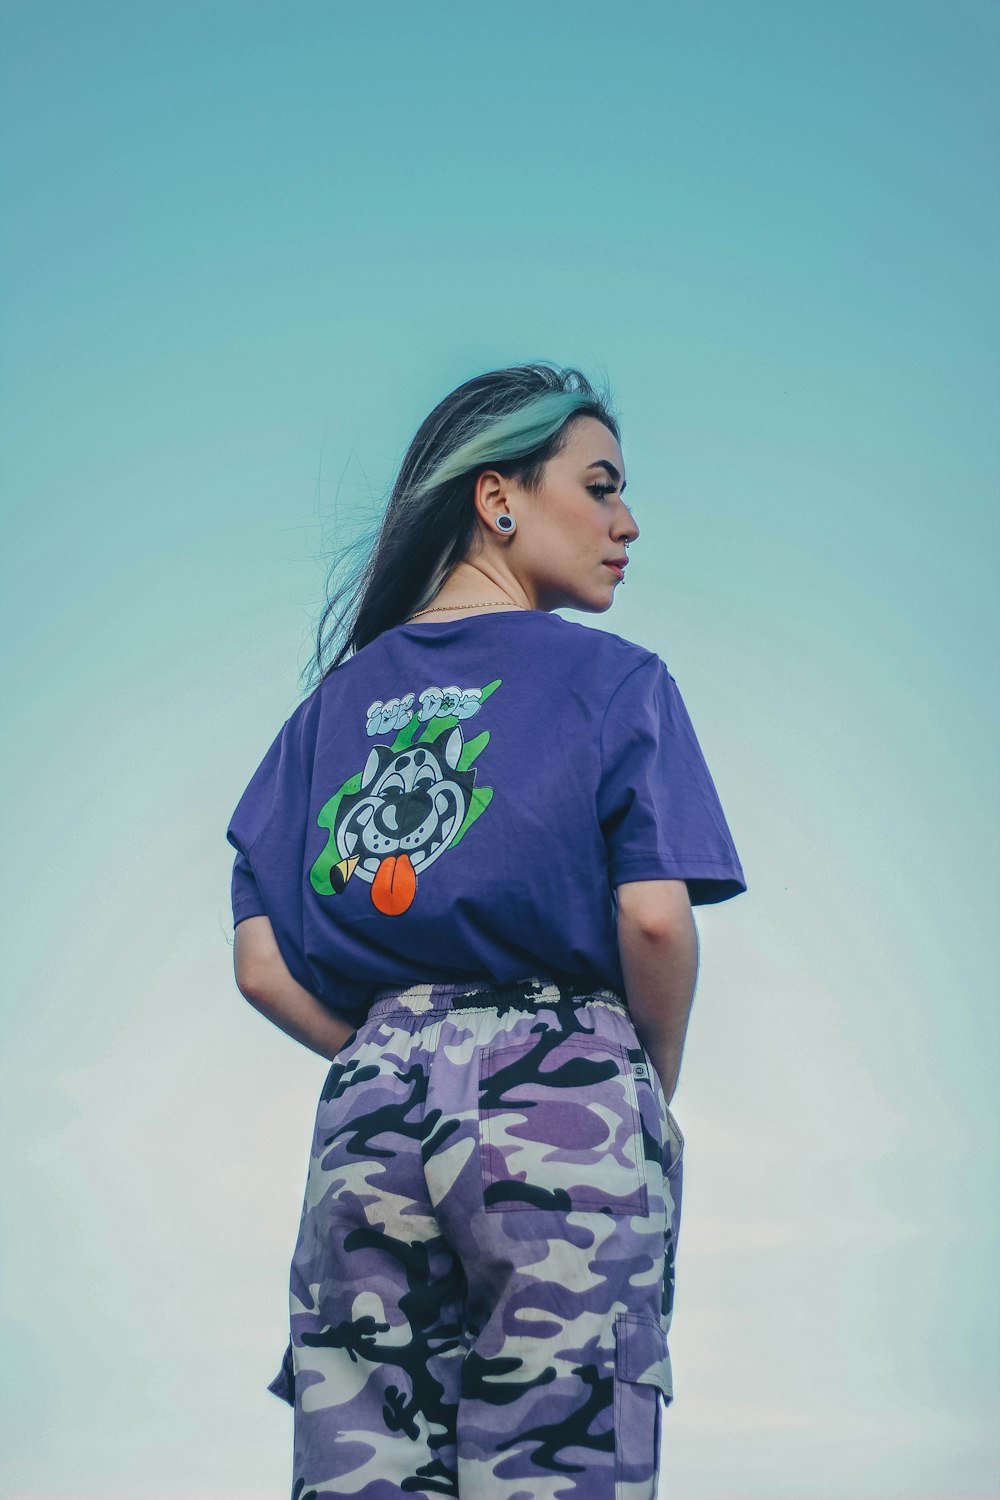 woman in blue crew neck t-shirt and white black and green camouflage pants